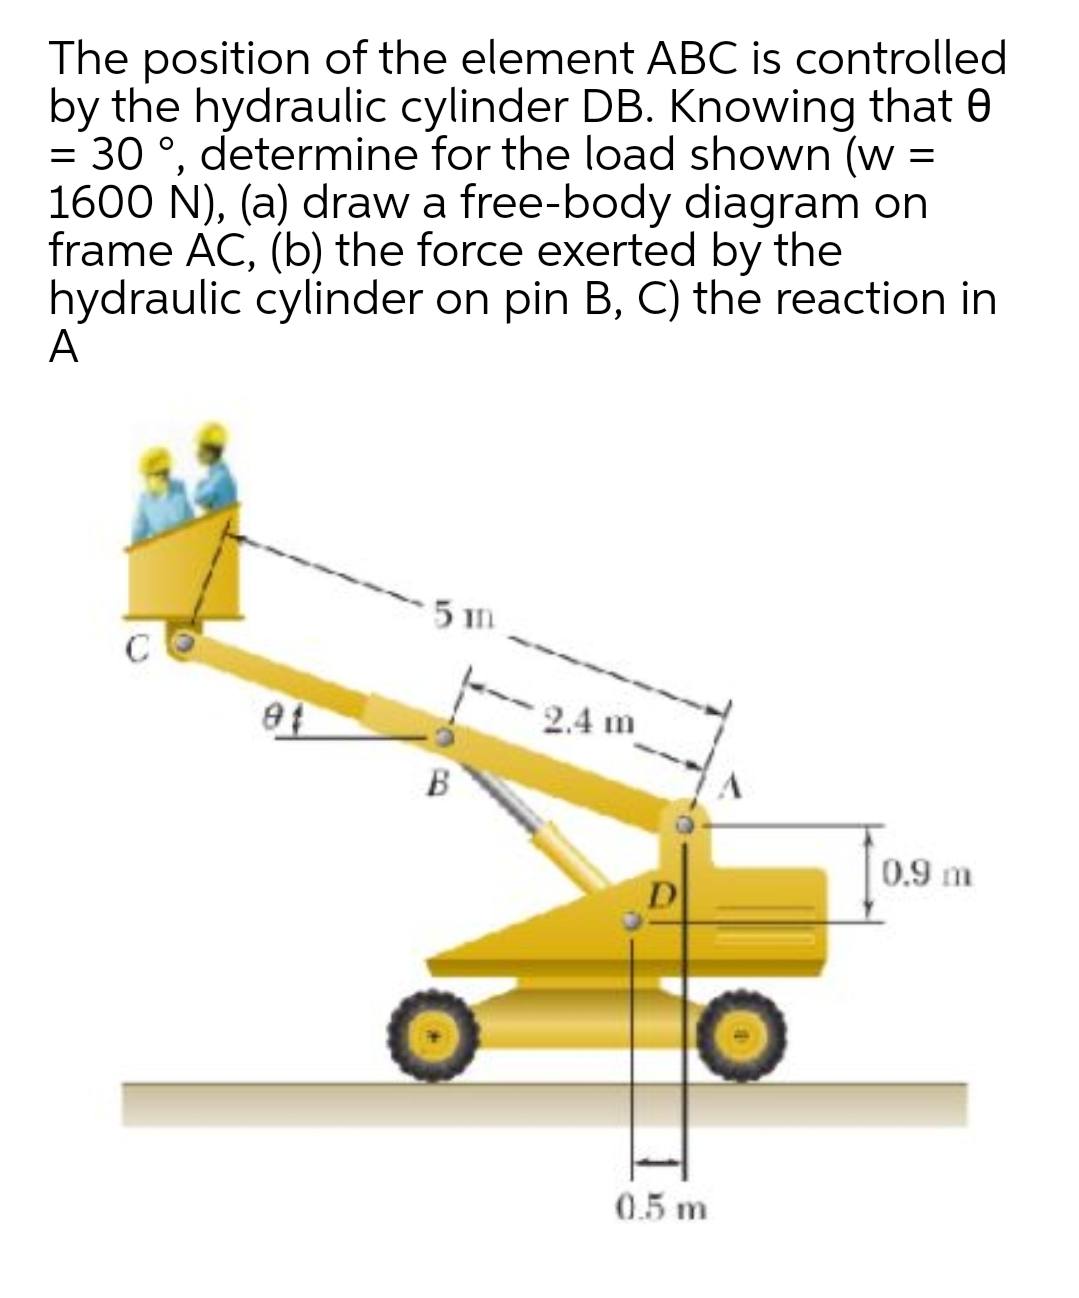 The position of the element ABC is controlled
by the hydraulic cylinder DB. Knowing that 0
= 30 °, determine for the load shown (w =
1600 N), (a) draw a free-body diagram on
frame AC, (b) the force exerted by the
hydraulic cylinder on pin B, C) the reaction in
A
5 in
C
2.4 m
B
0.9 m
D
0.5 m
